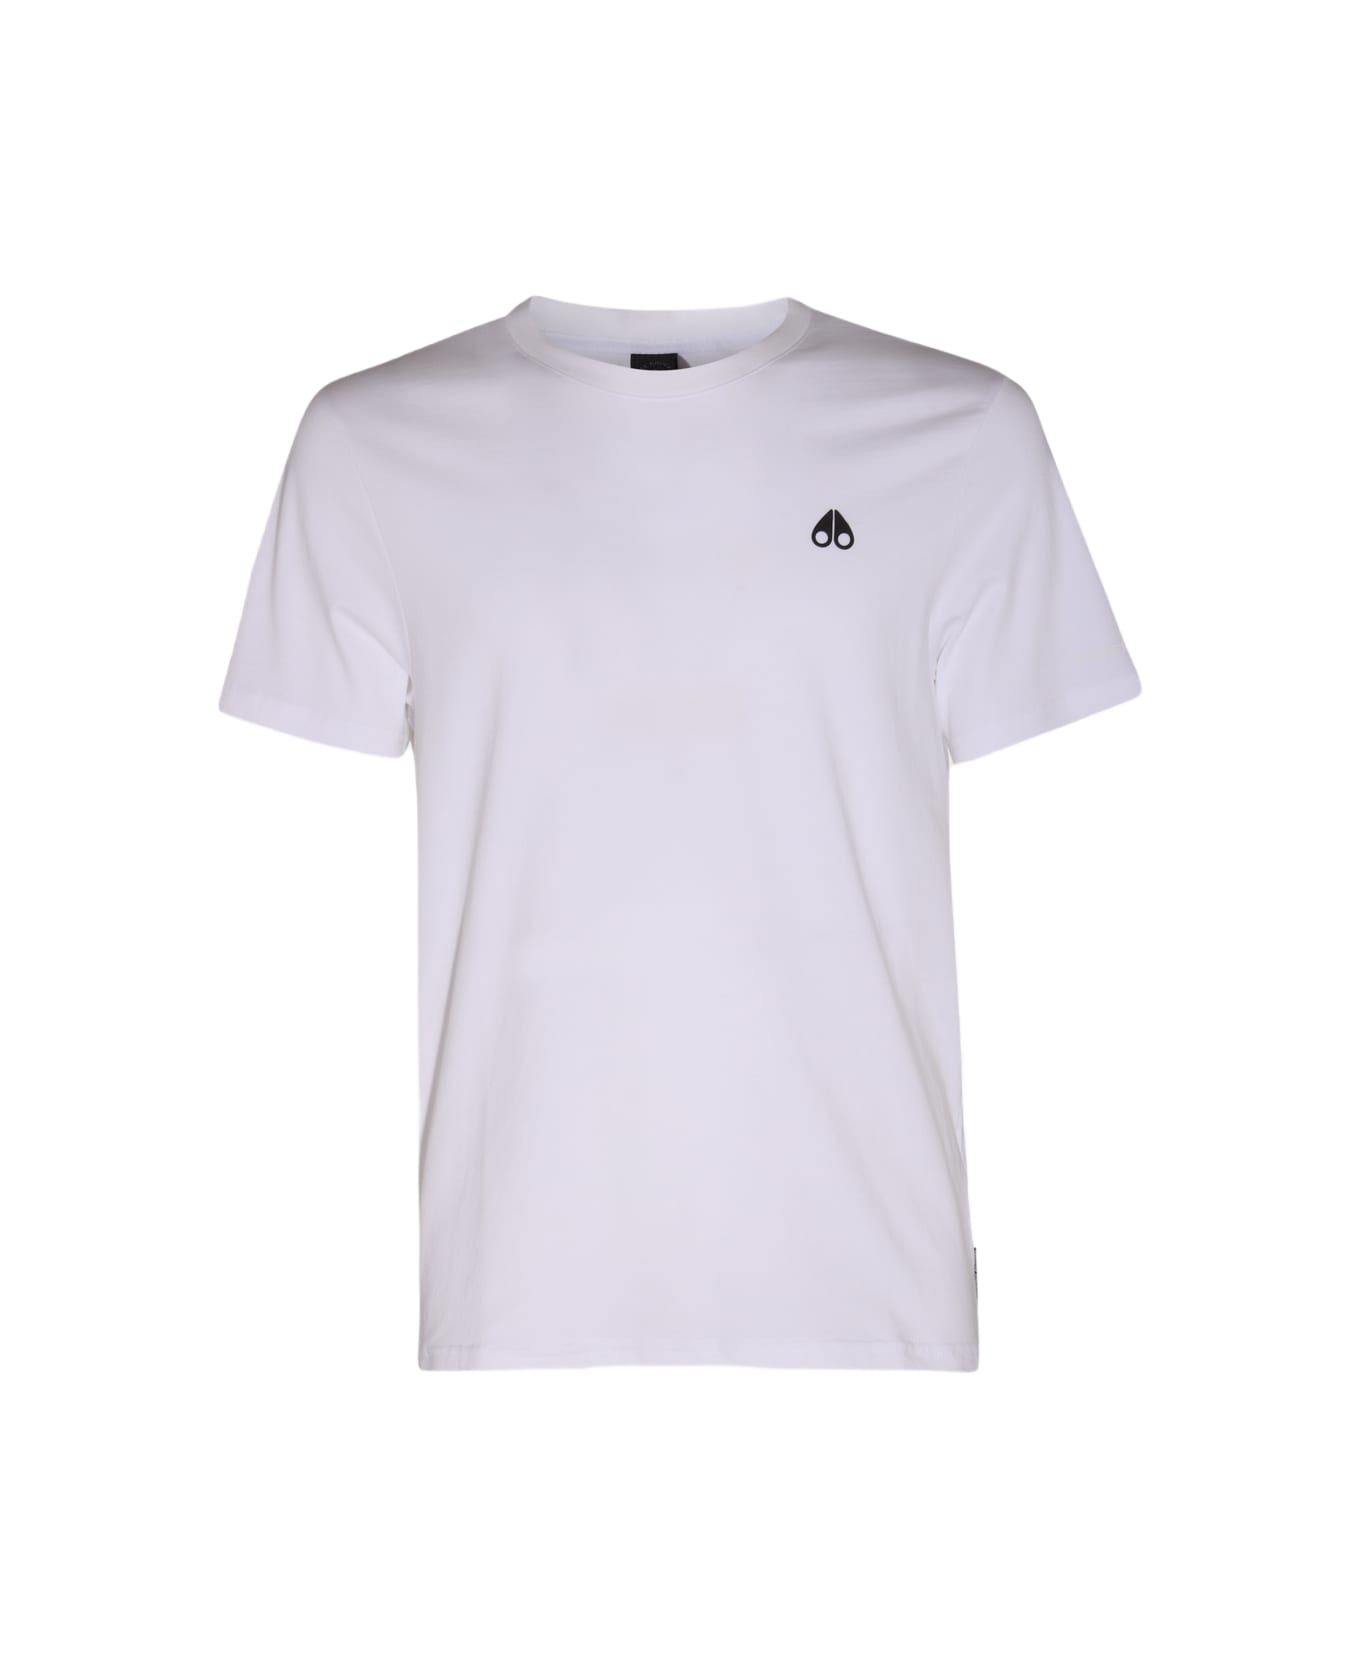 Moose Knuckles White Cotton T-shirt - White